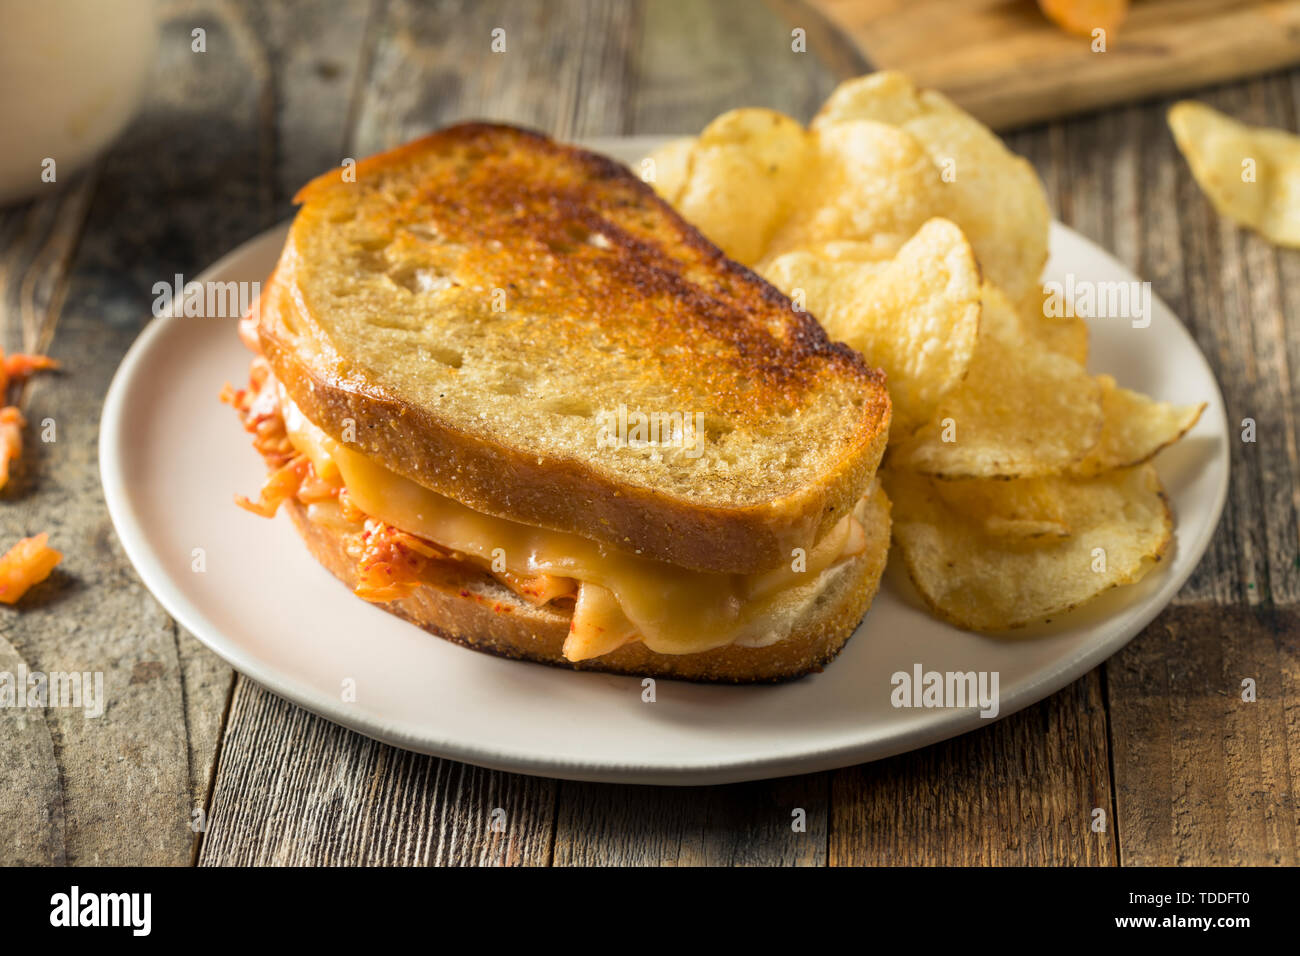 Homemade Korean Grilled Cheese Sandwich with Chips Stock Photo - Alamy